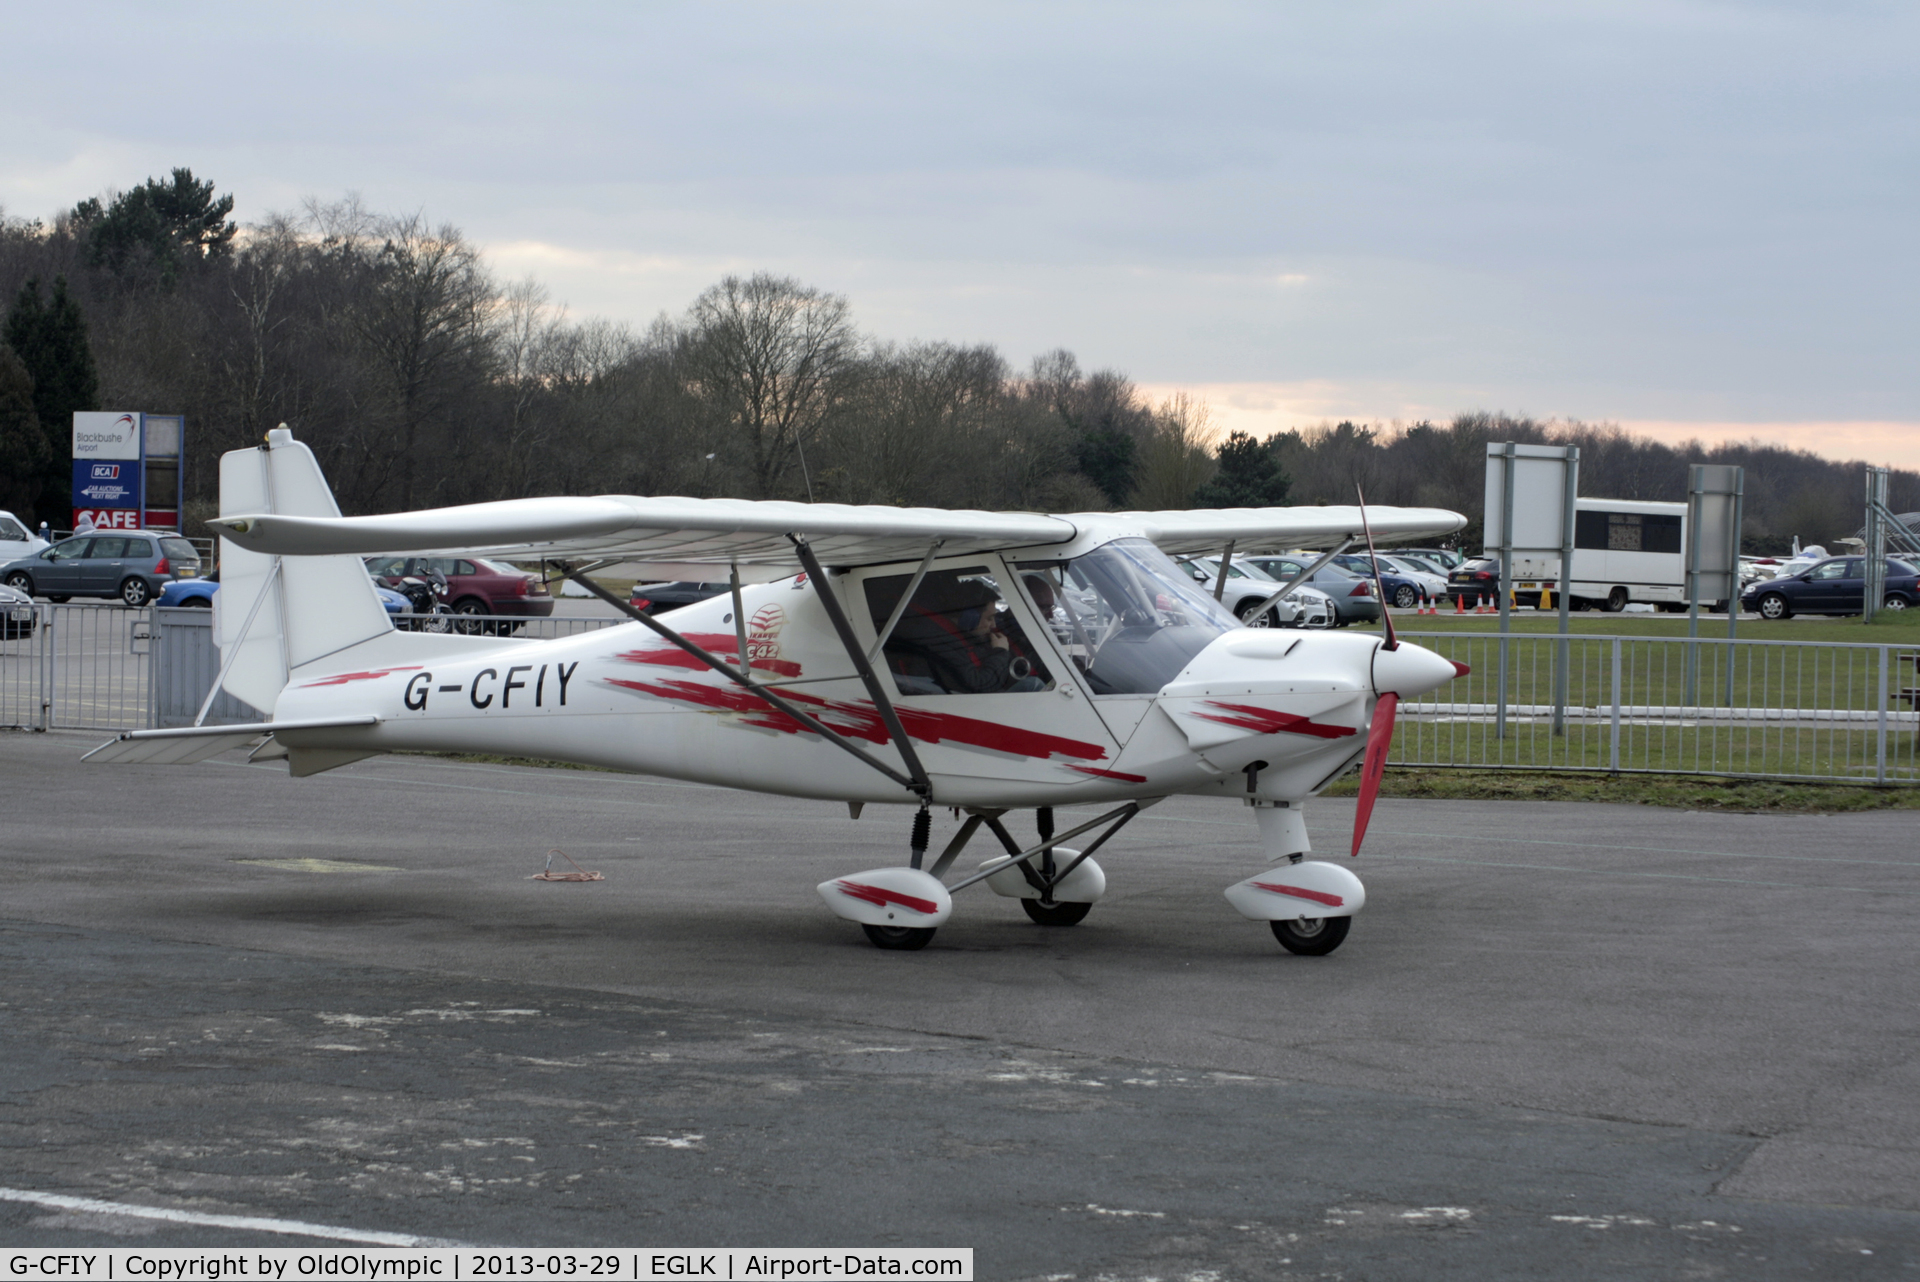 G-CFIY, 2008 Comco Ikarus C42 FB100 C/N 0804-6954, Requesting start-up for departure for R/W 07